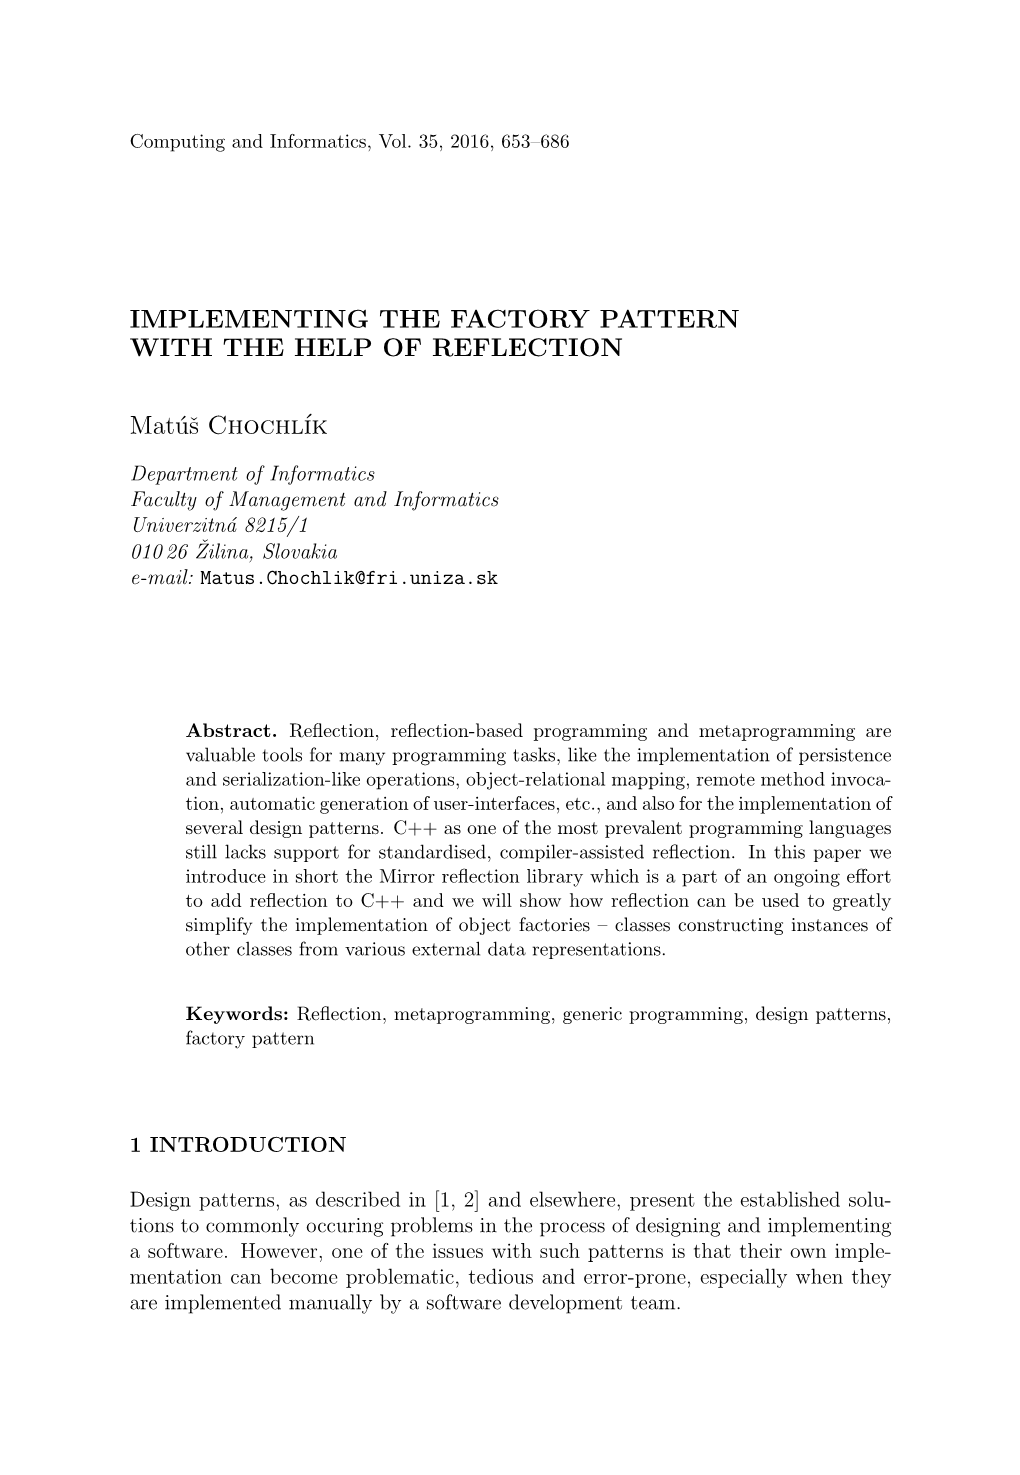 Implementing the Factory Pattern with the Help of Reflection